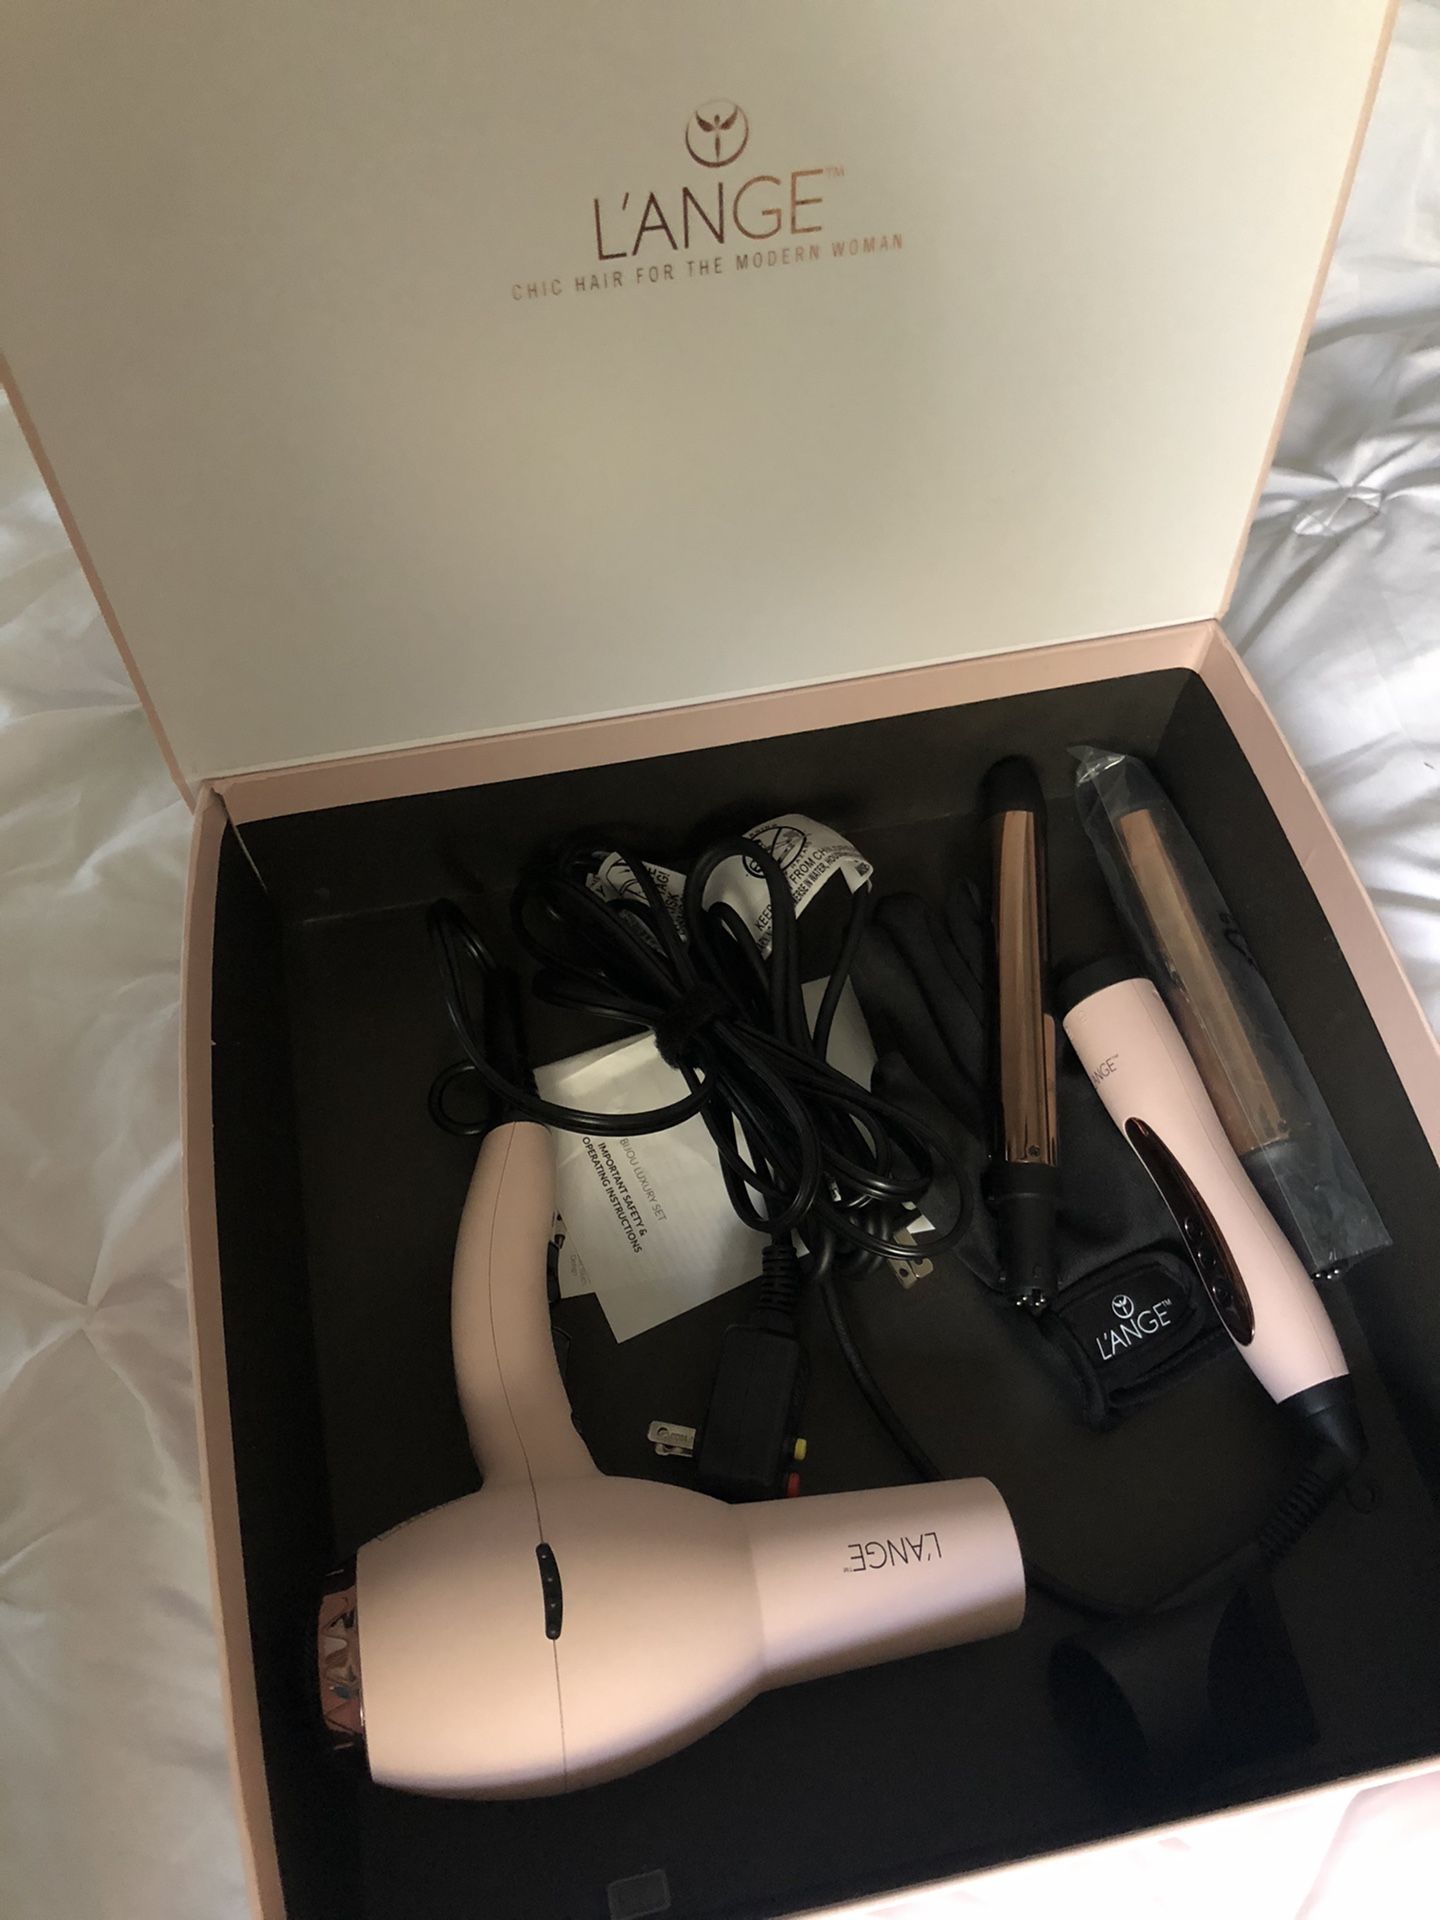 L’ange Soleil Blow Dryer and 25mm and 35mm interchangeable wand from the Bijou set.